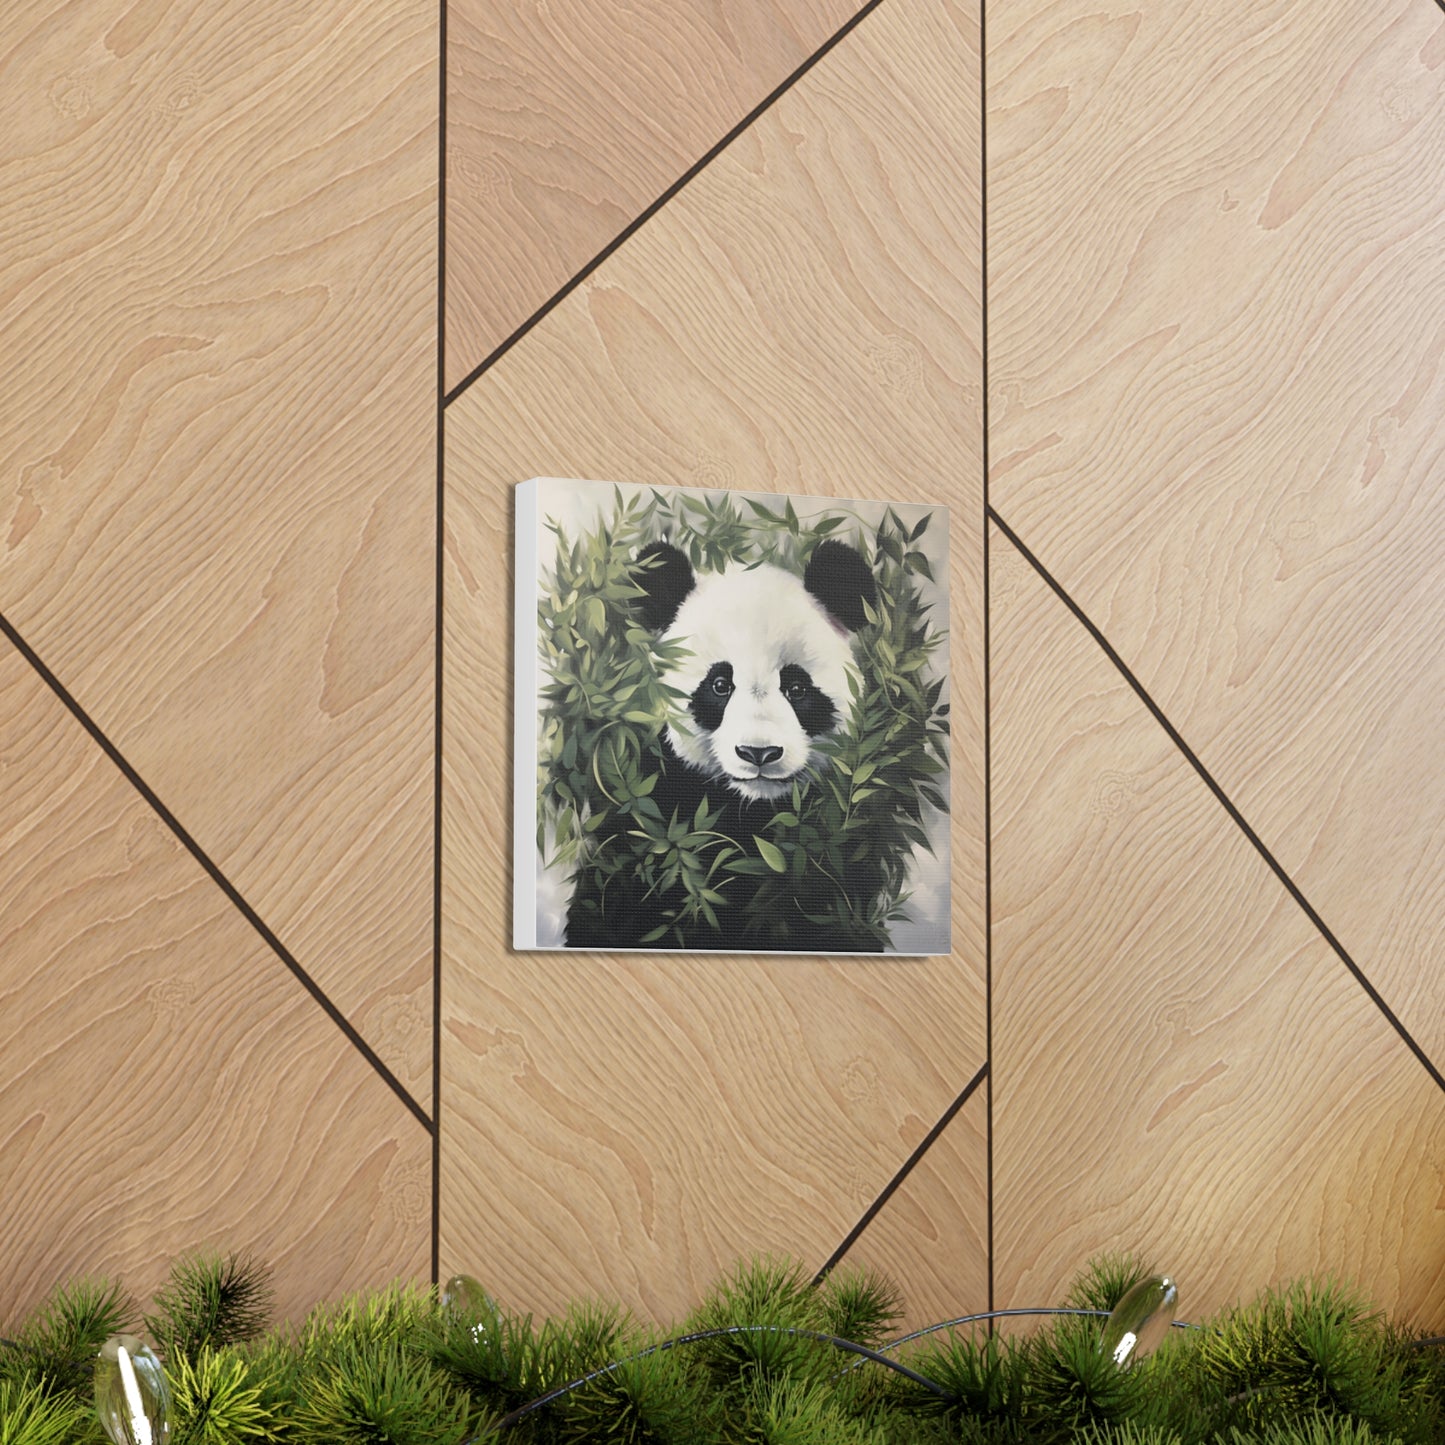 Panda Prints: For the Artistically Inclined